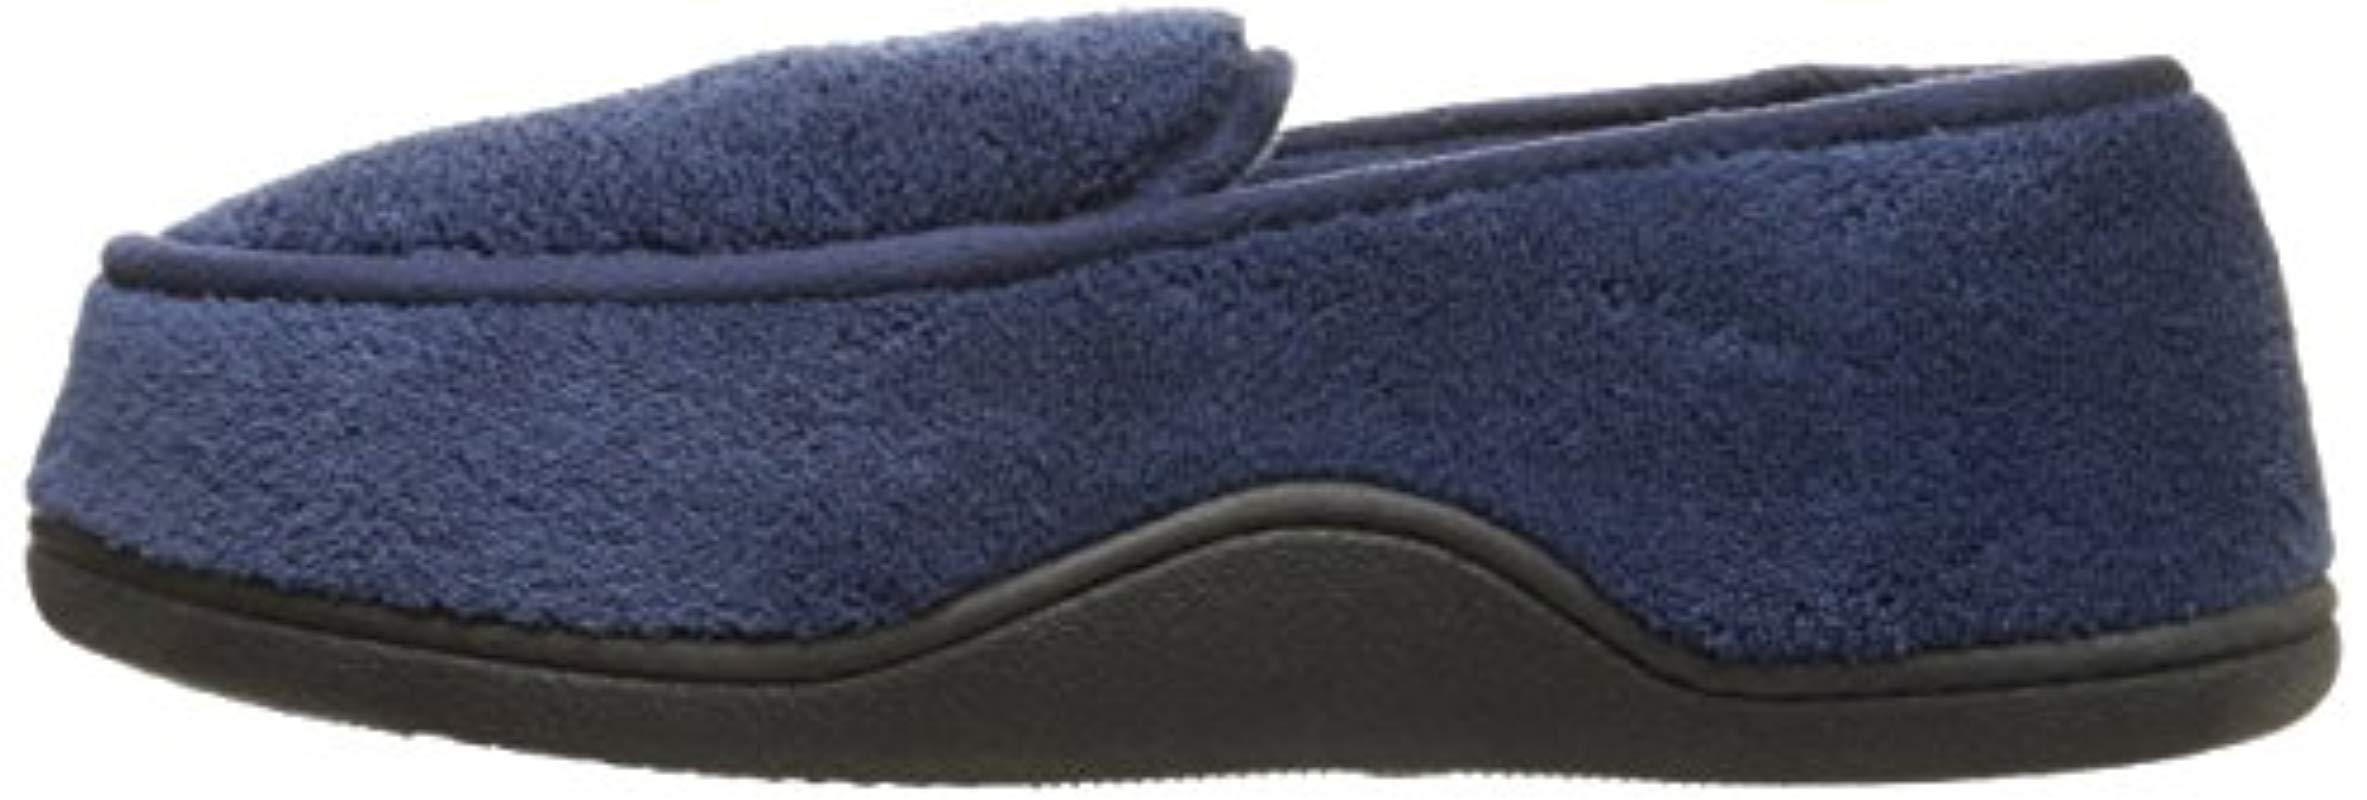 Lyst - Isotoner Terry Moccasin Slipper With Memory Foam For Indoor ...